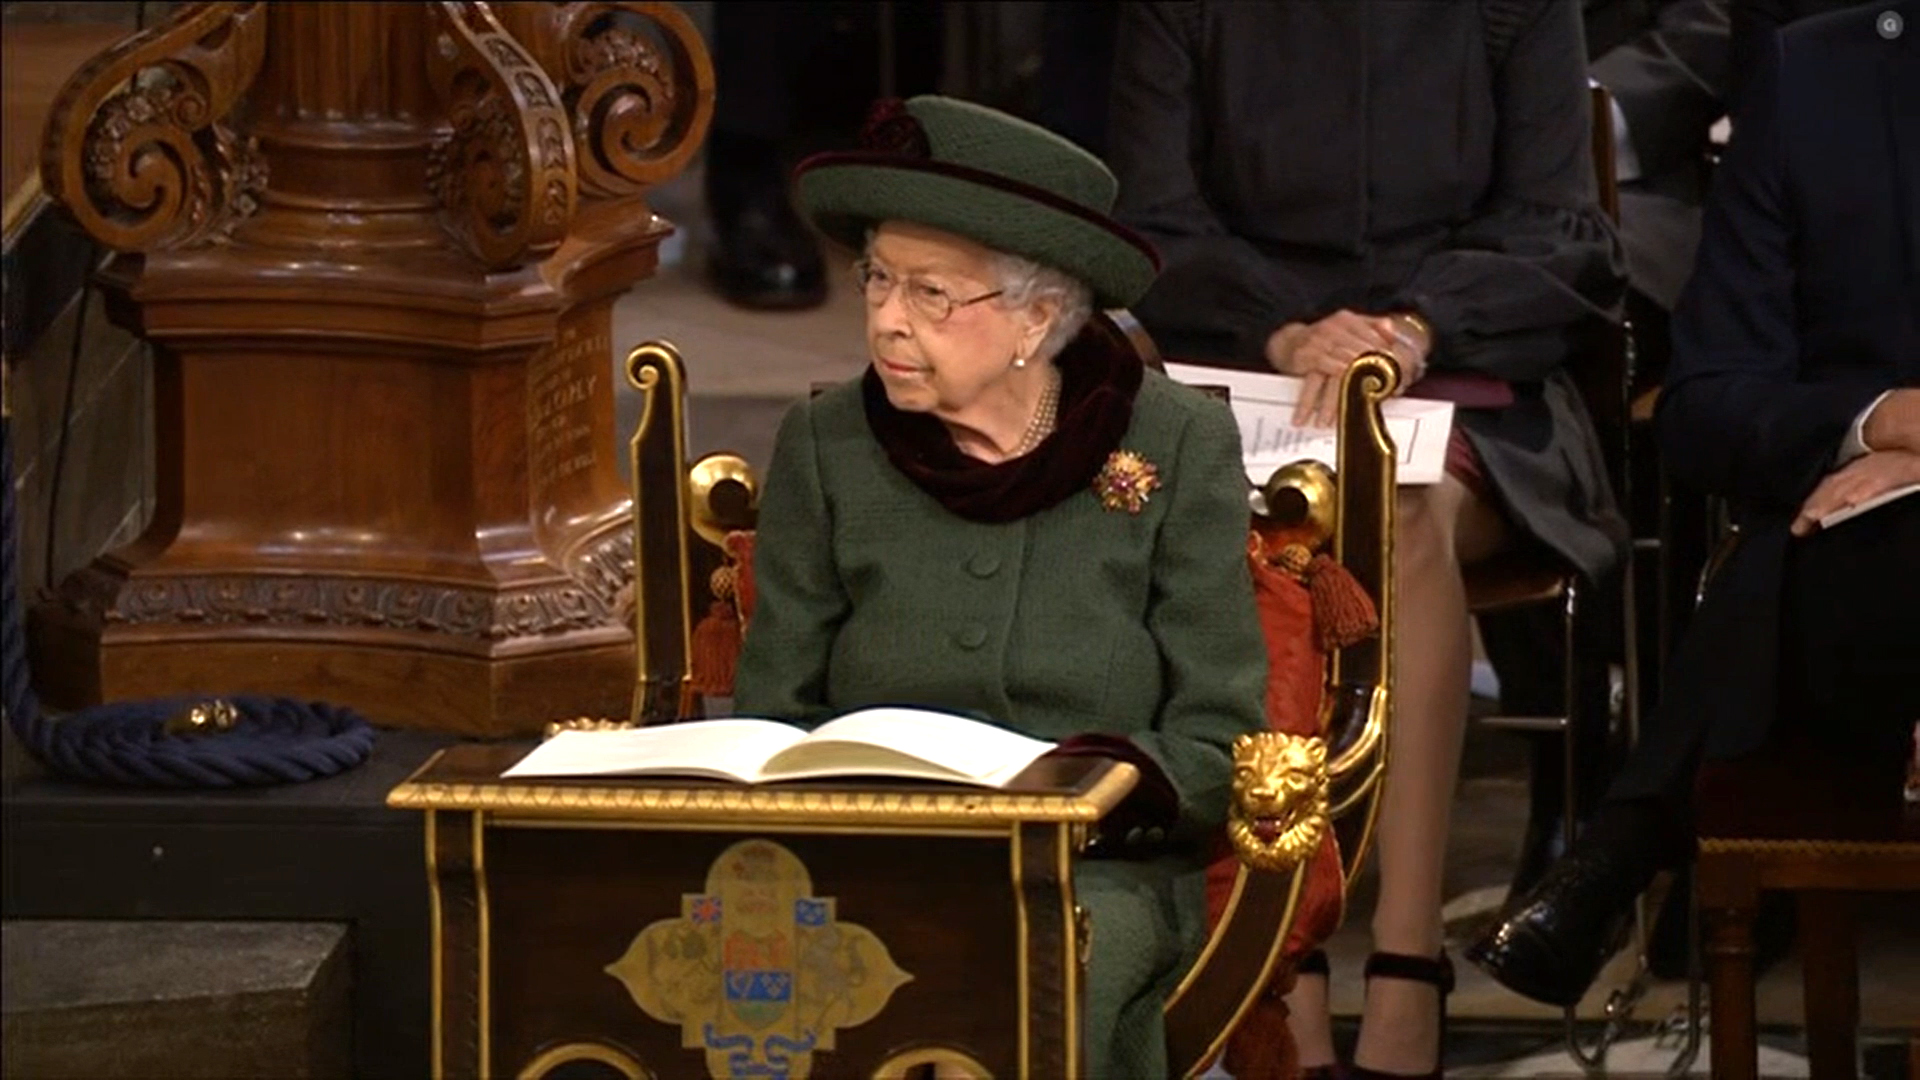 HM Queen Elizabeth II entering the Westminster Abbey, Thanksgiving Service for the late Duke of Edinburgh; Photo – BBC One (screenshot)